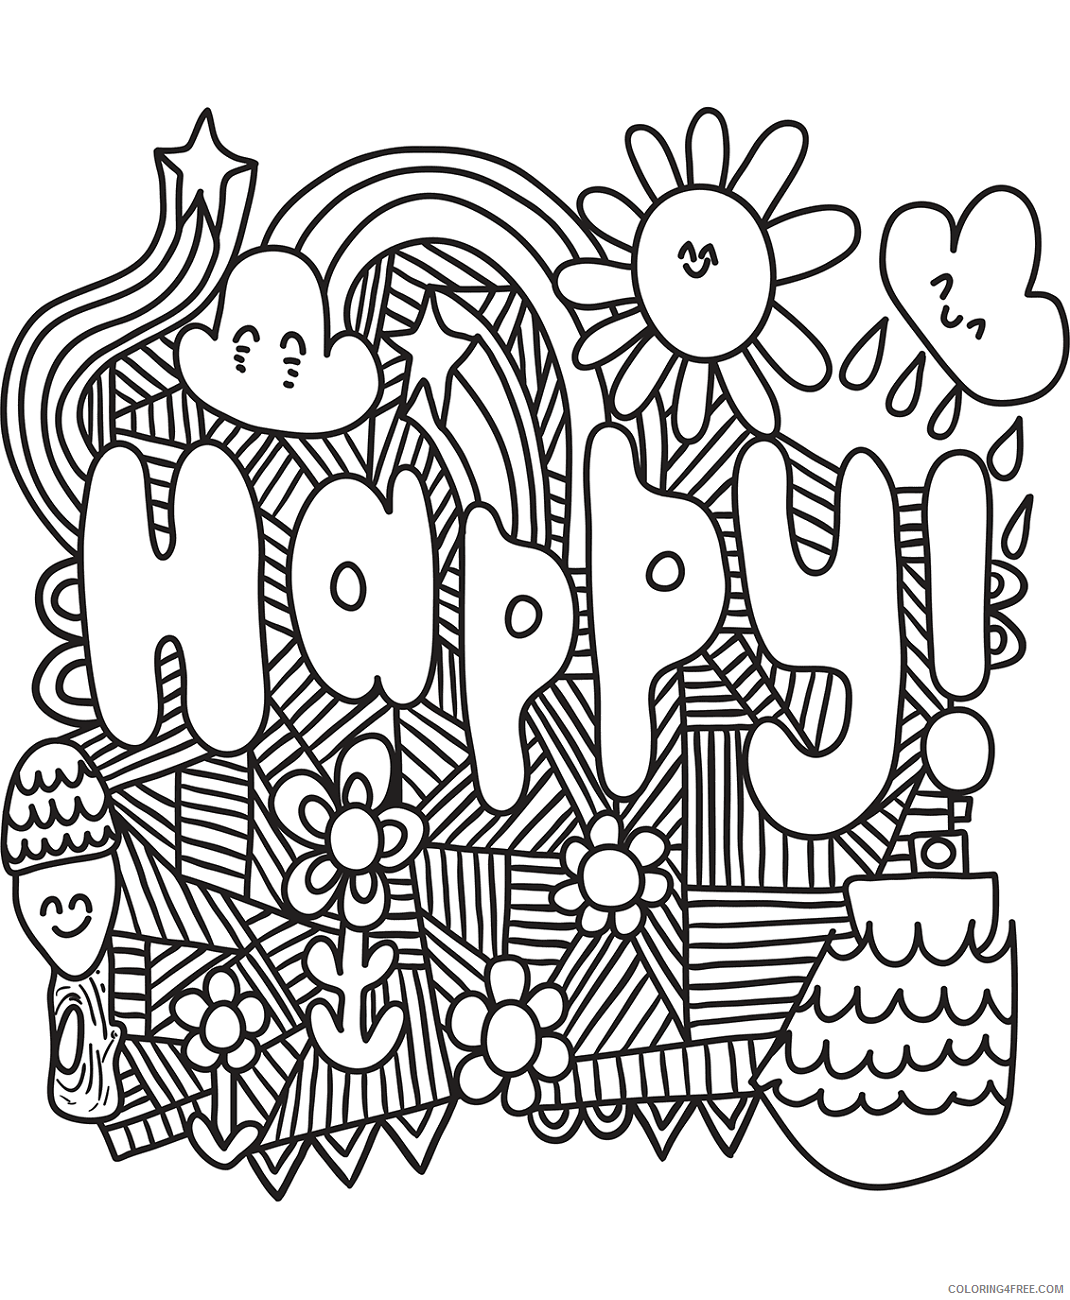 Doodle Coloring Pages Adult happy_doodle_art a4 Printable 2020 318 Coloring4free